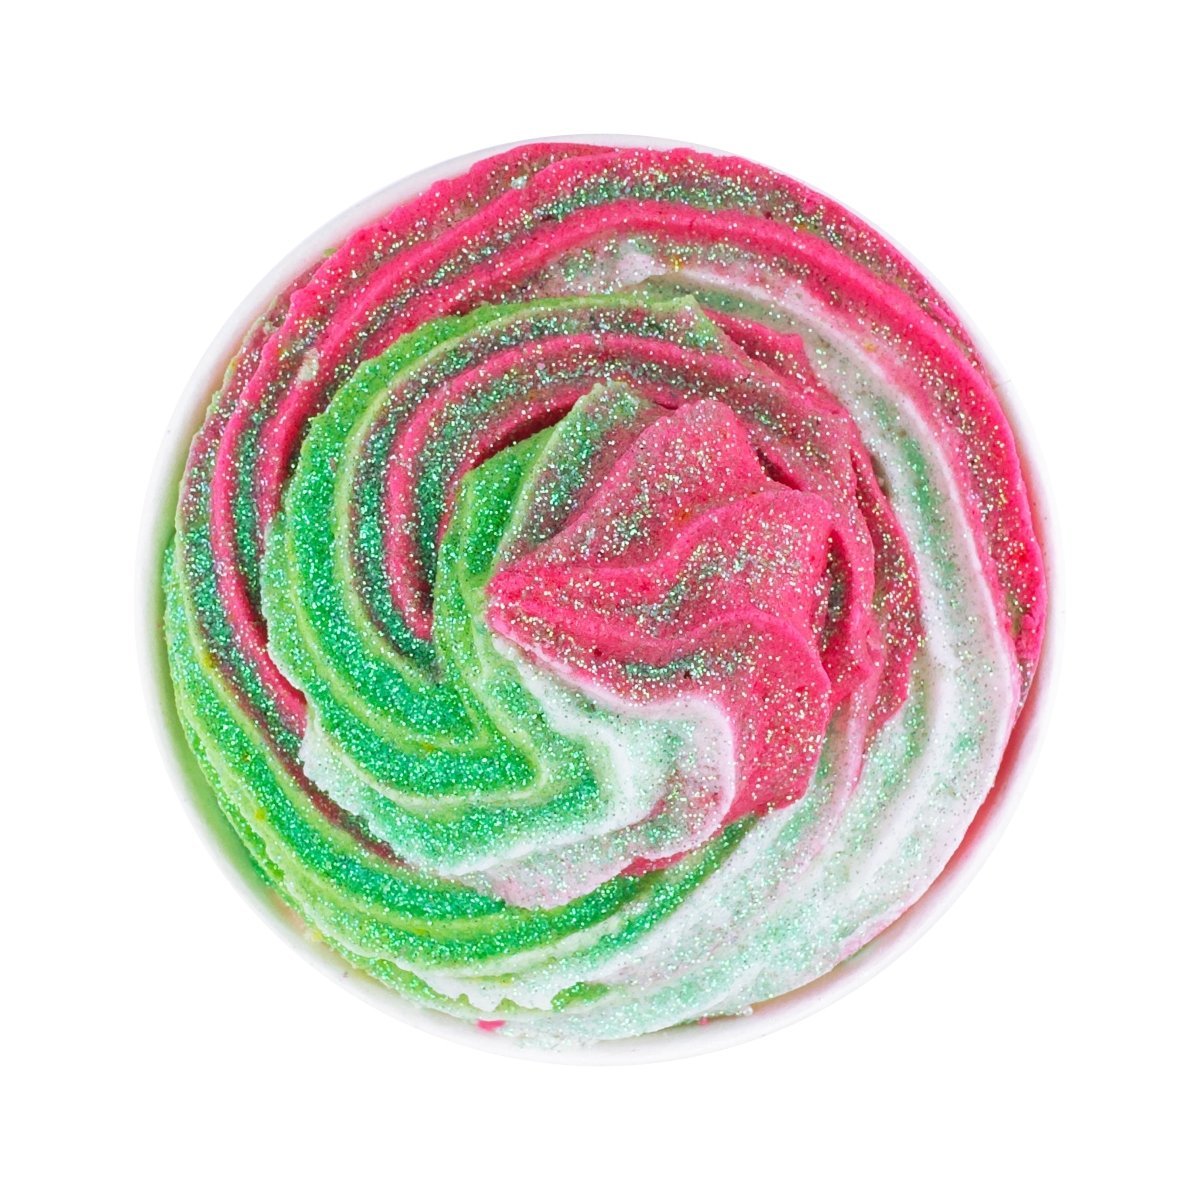 Watermelon Swirl Bath Bomb Ice Cream Cup for Kids & Adults - Colourful Glitter & Sprinkles - Made in Australia by Bath Box